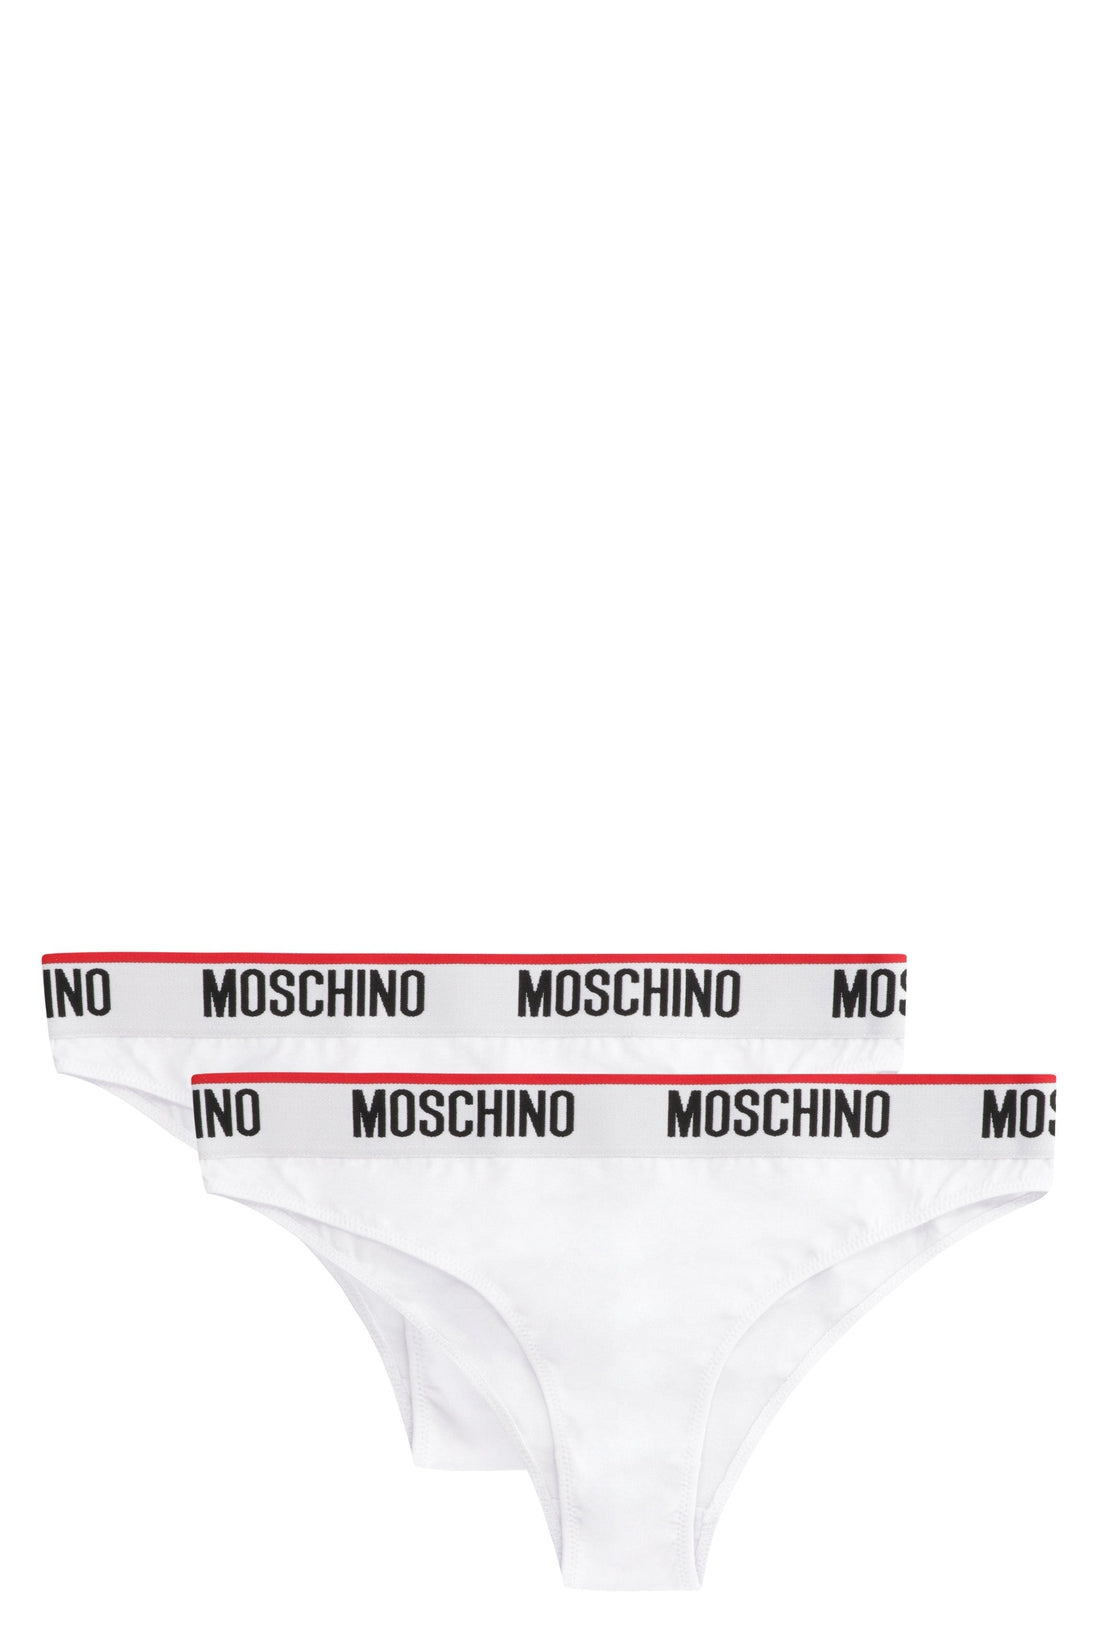 Moschino-OUTLET-SALE-Set of two Logo band briefs-ARCHIVIST